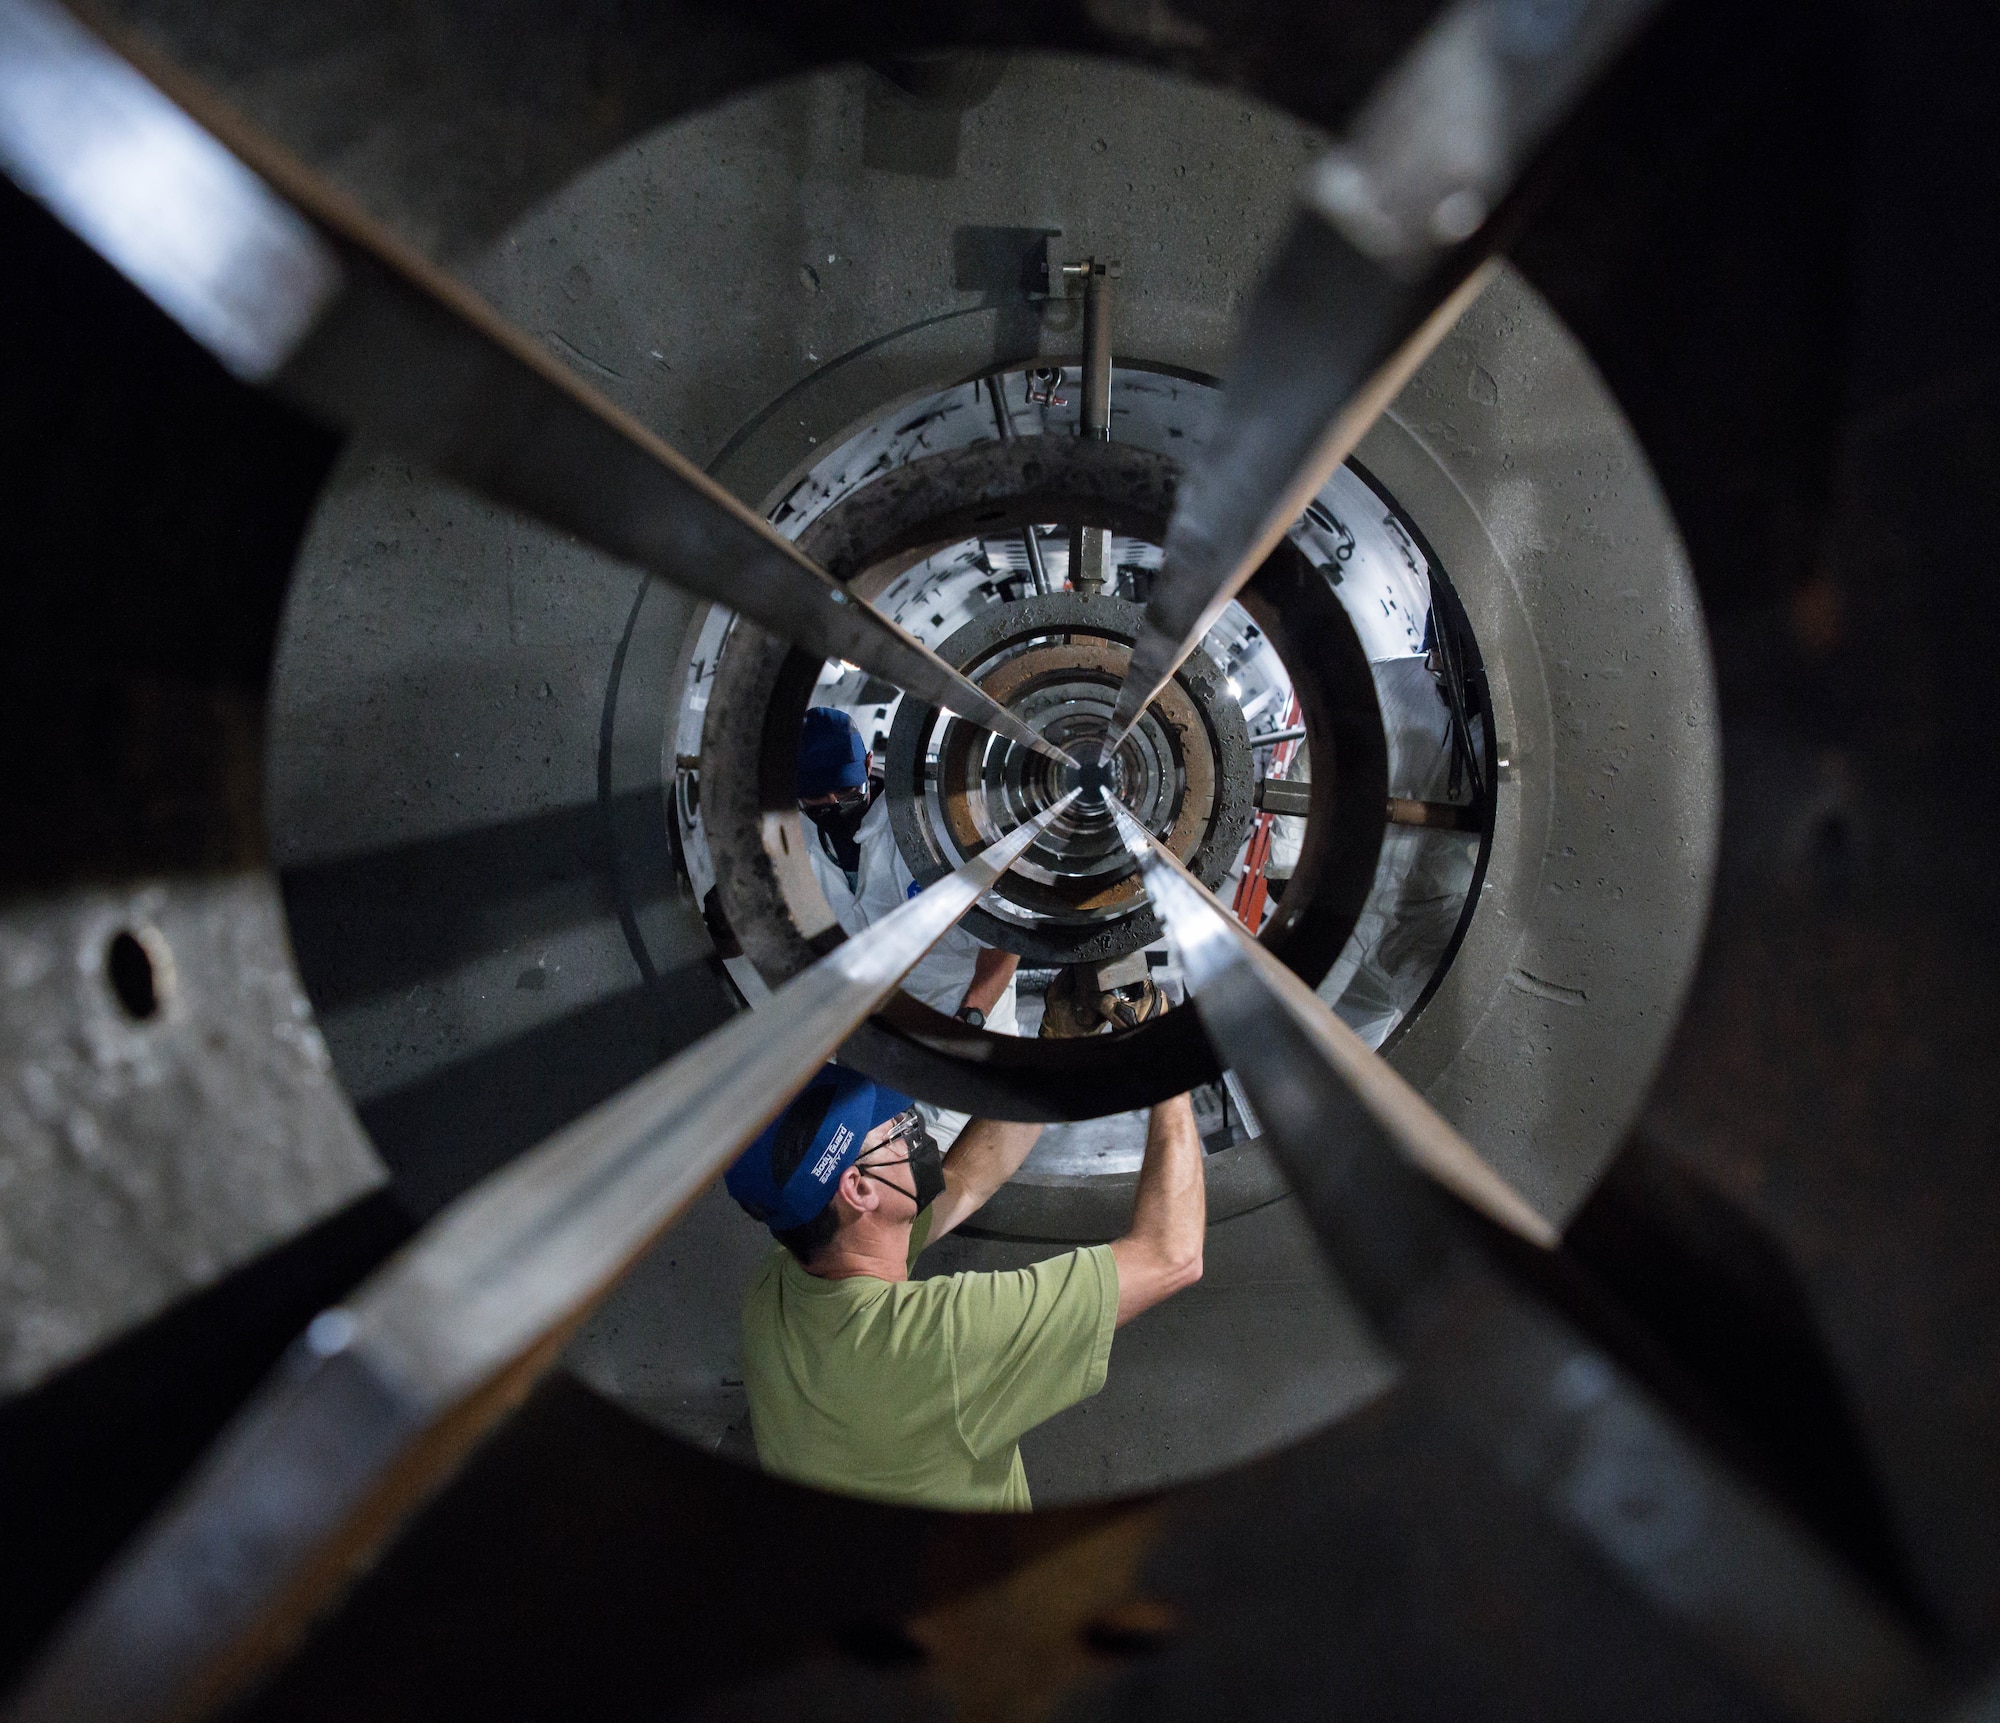 Tim Gilliam, an Arnold Engineering Development Complex machinist, adjusts a piece on the 8-inch track of the Hyper-ballistic Range G gun May 3, 2021, at Arnold Air Force Base, Tenn. After a projectile leaves the gun barrel it is guided by the track until within a short distance of the target. (U.S. Air Force photo by Jill Pickett)